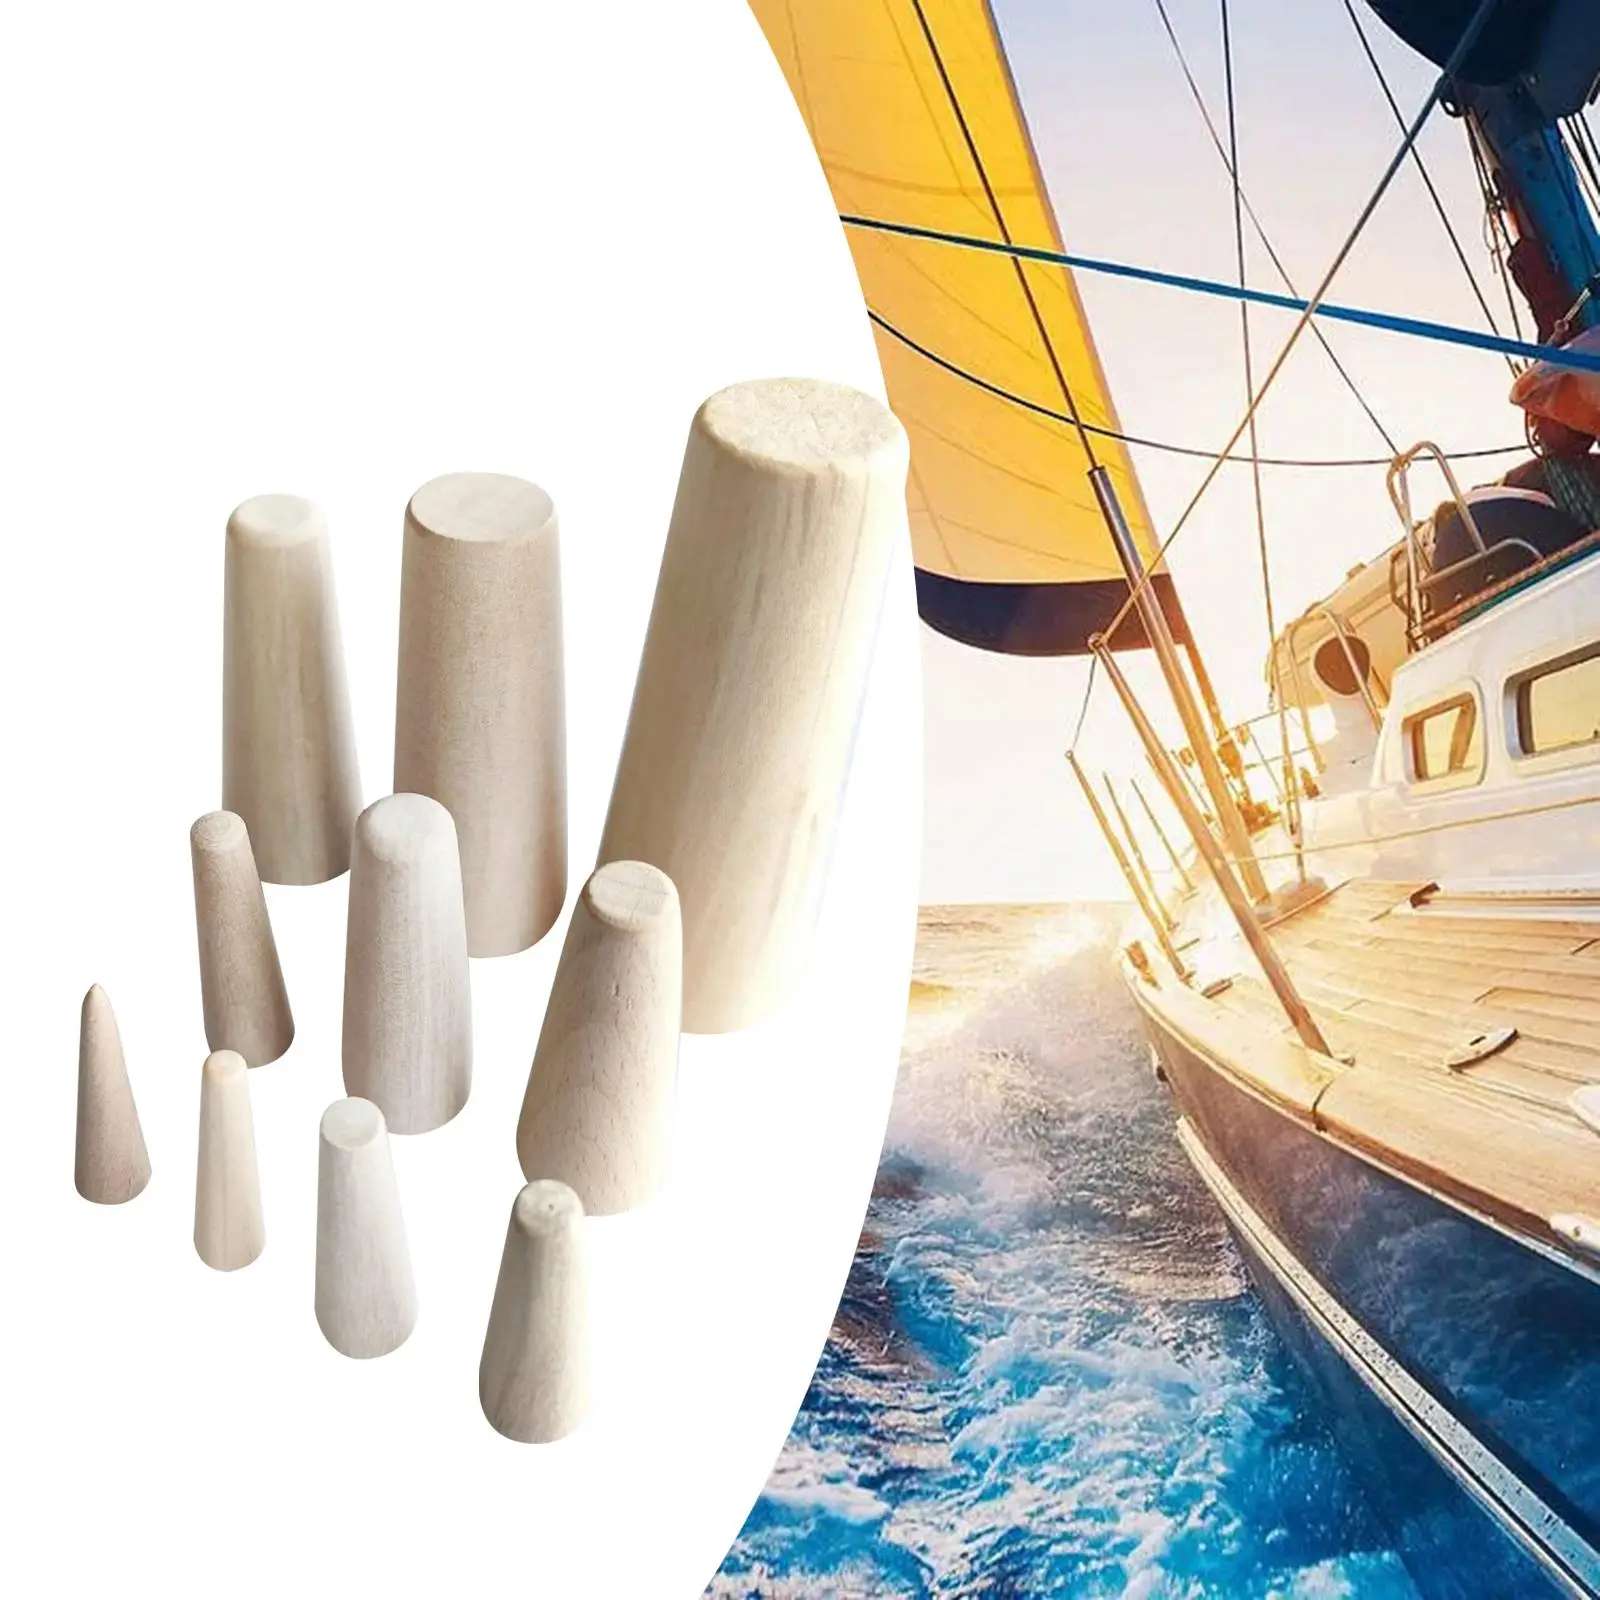 10Pcs Boat Emergency Wood Plugs Assorted Simple 7 Different Sizes thru Hull Drain Plug Wooden Bungs for Marine Yacht Boat